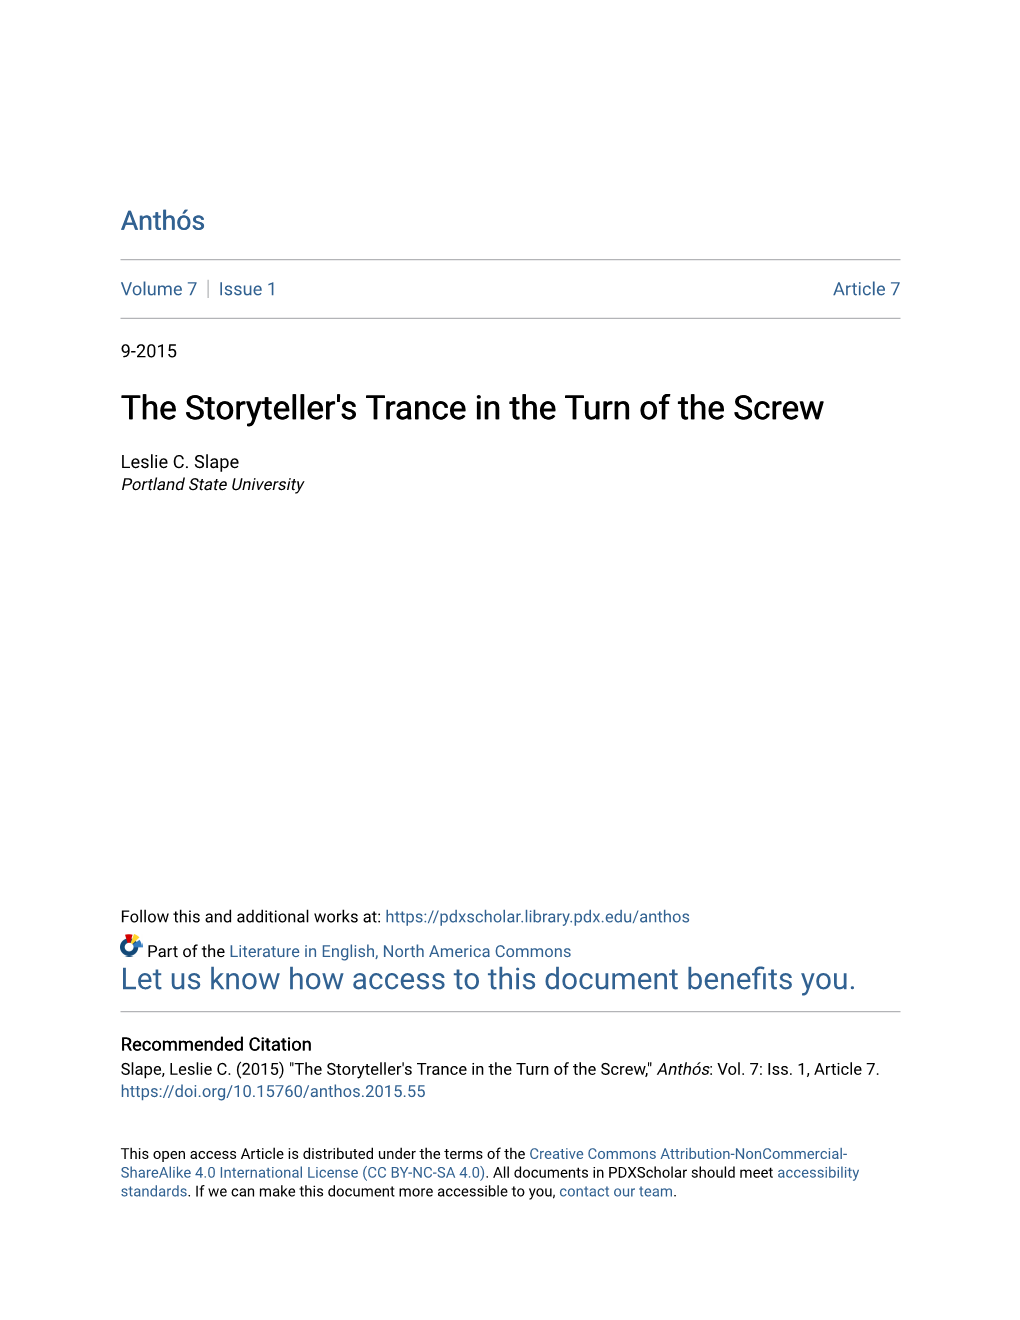 The Storyteller's Trance in the Turn of the Screw